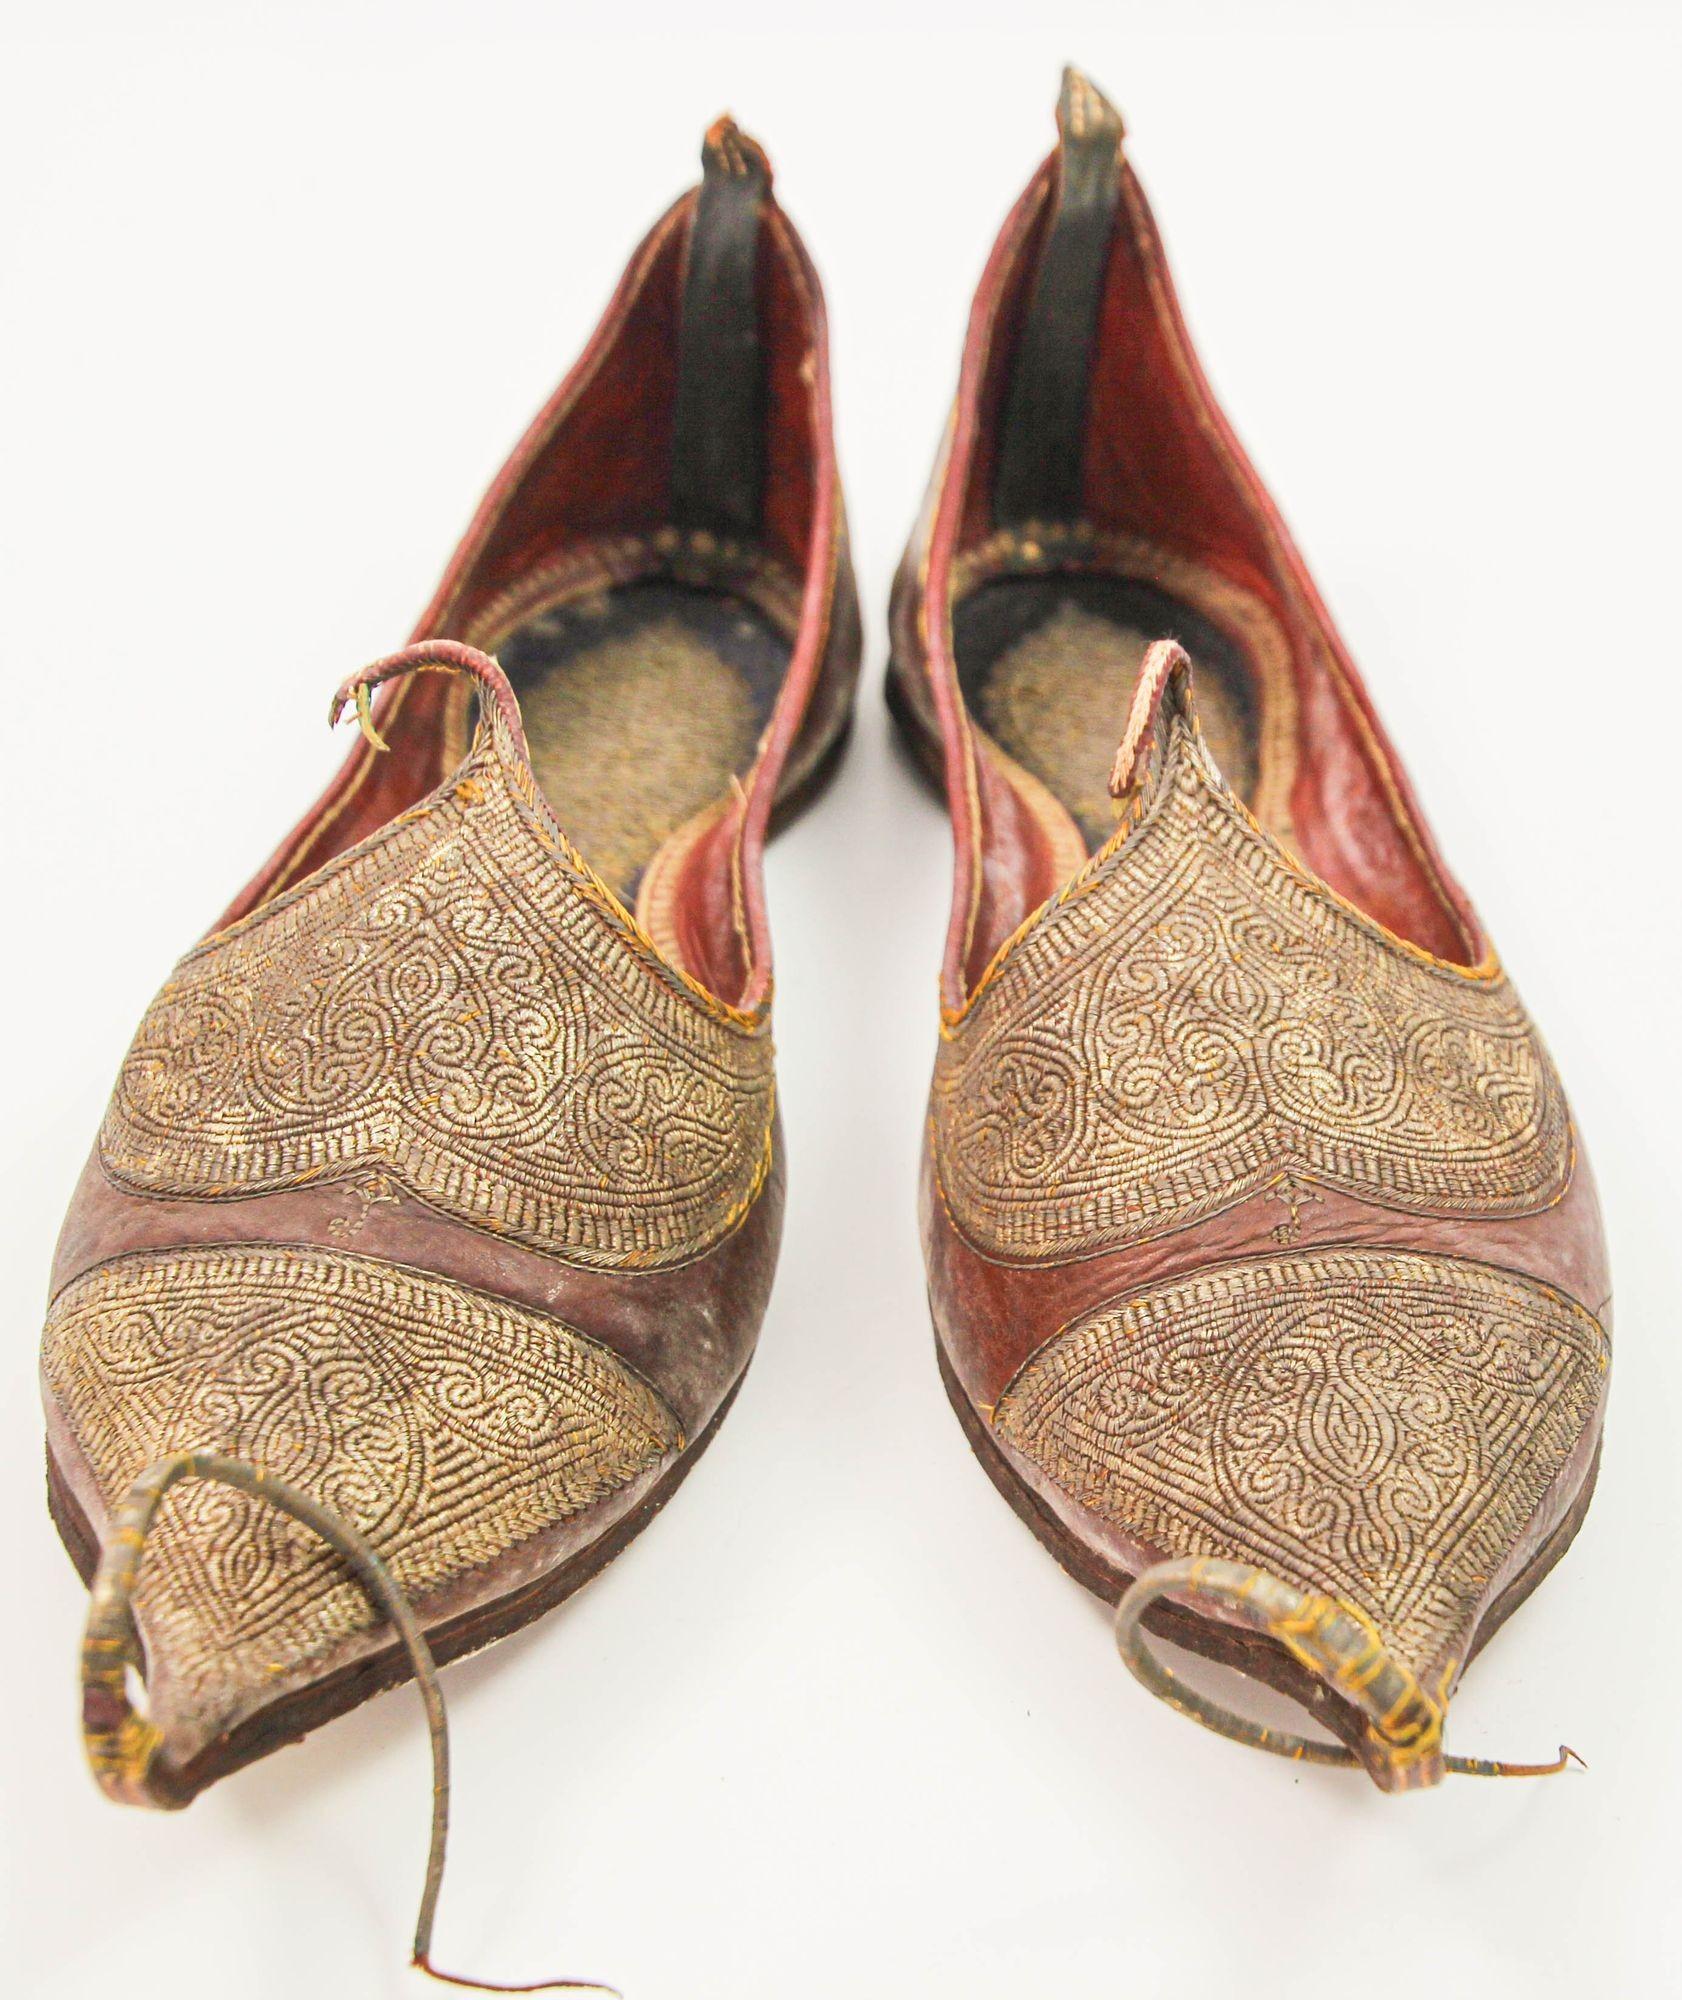 Antique Leather Mughal Moorish Turkish Ottoman Shoes with Gold Embroidered.
A pair of rare late 19th century hand stitched and hand tooled leather shoes with hand embroidered with gilt metallic threads.
Measures: 11